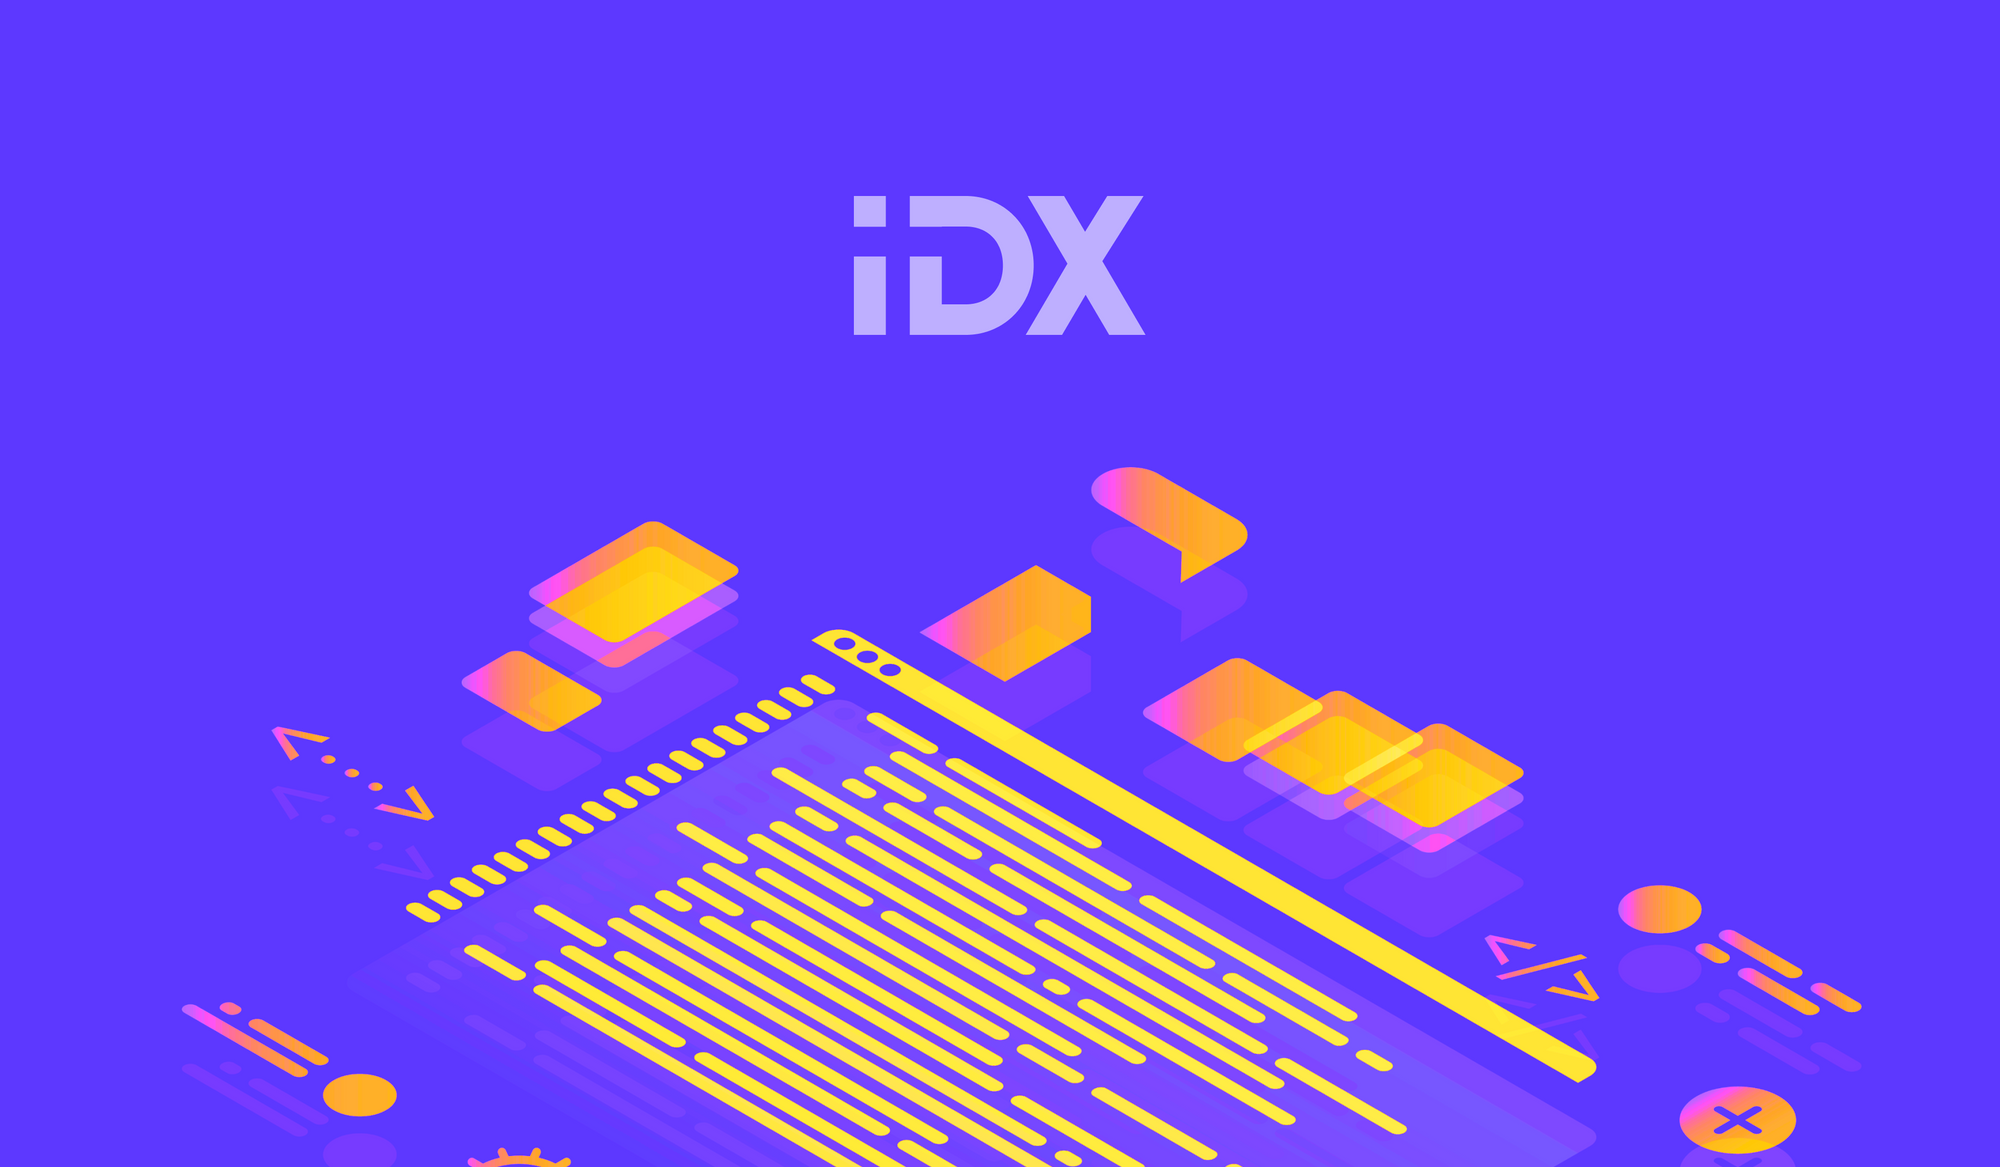 How to migrate from 3Box to IDX for profile queries